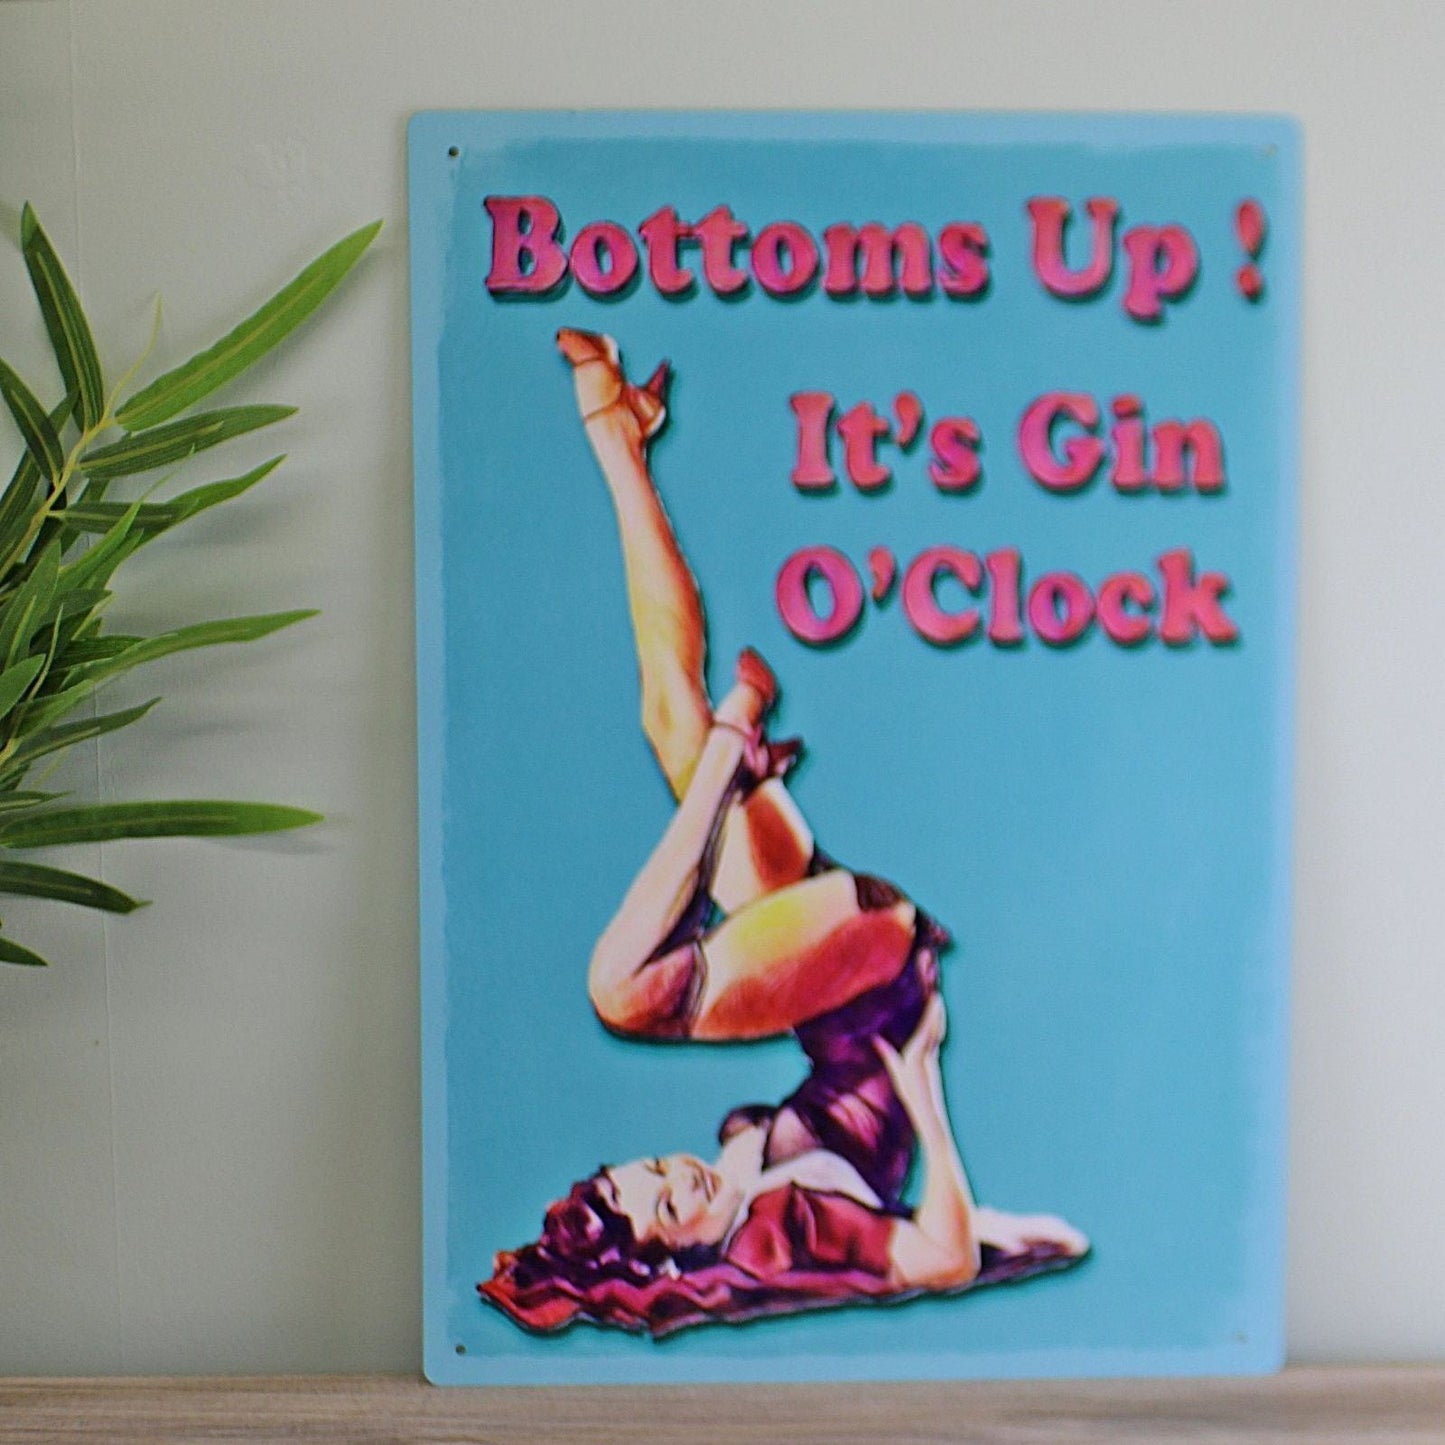 Vintage Metal Sign - Bottoms Up It's Gin O'Clock - Ashton and Finch